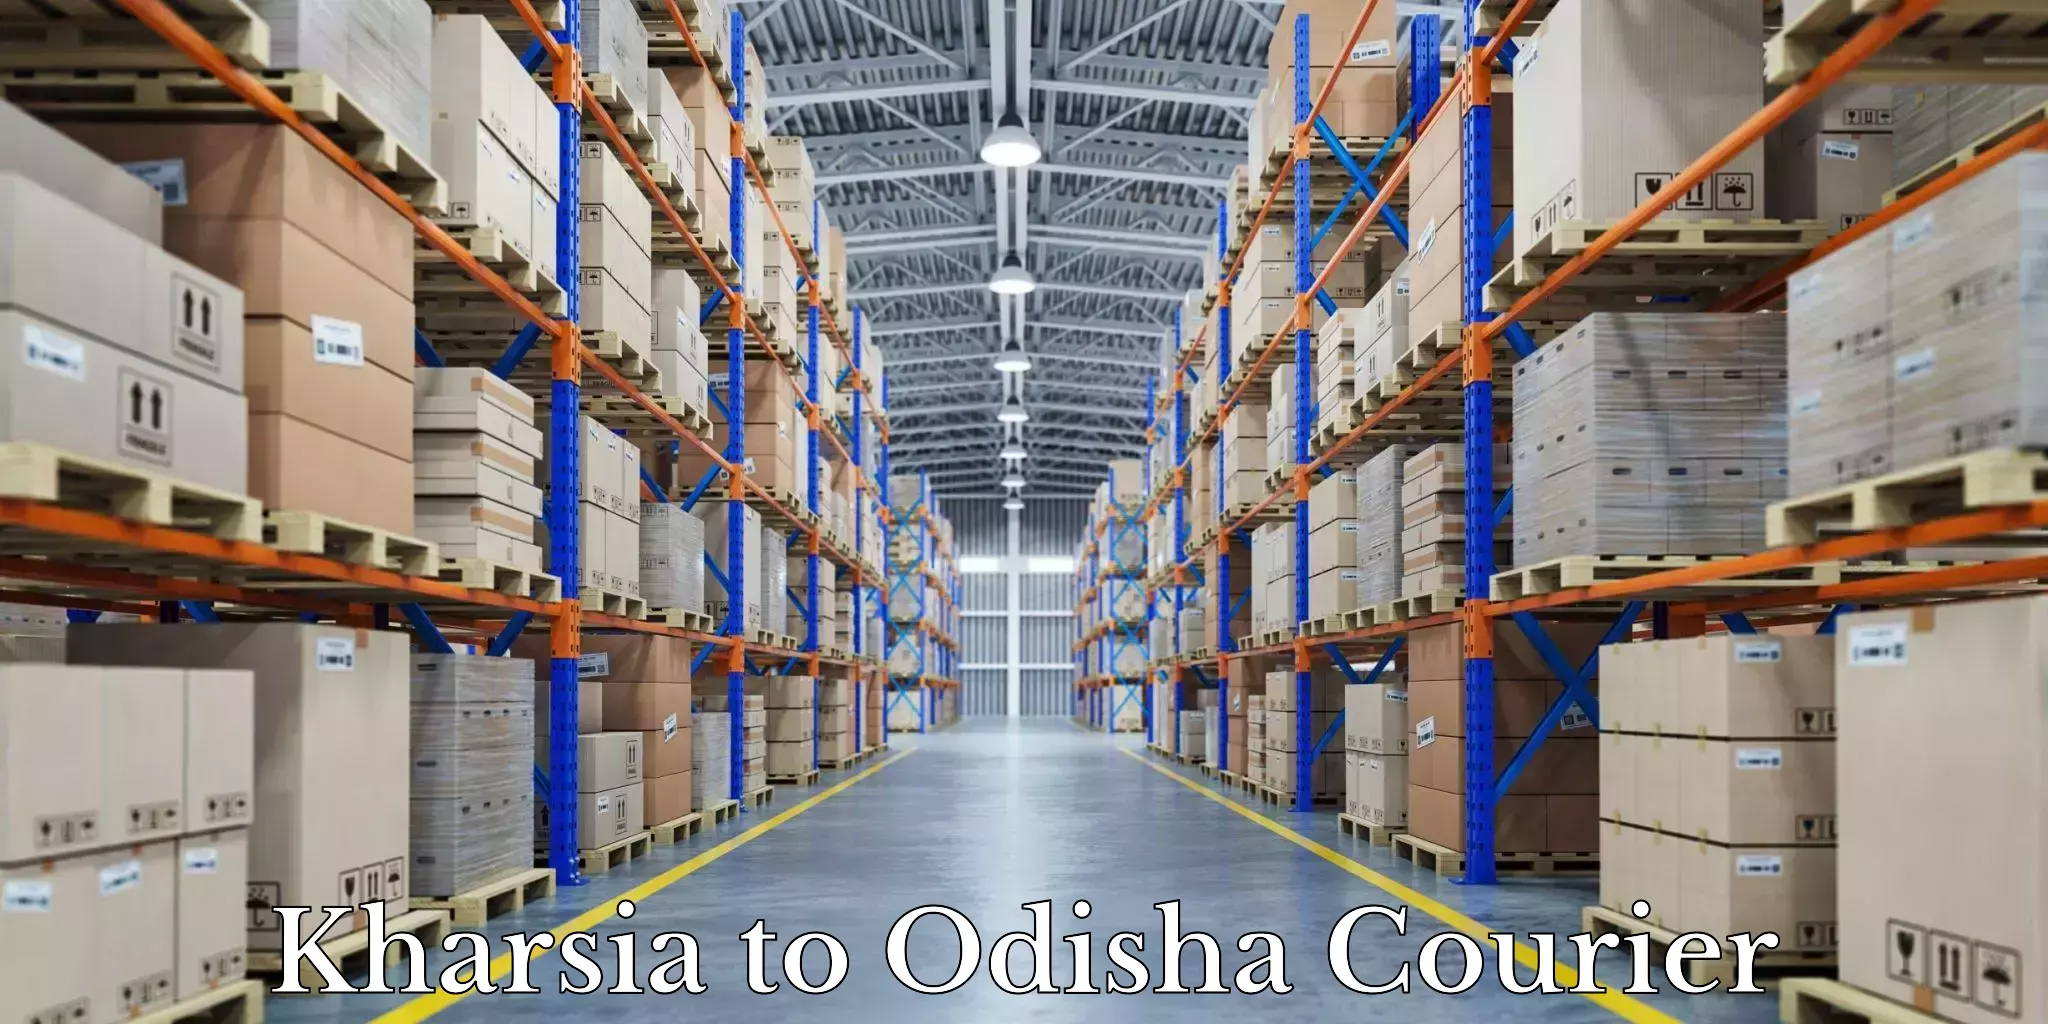 Quality moving and storage in Kharsia to Daspalla